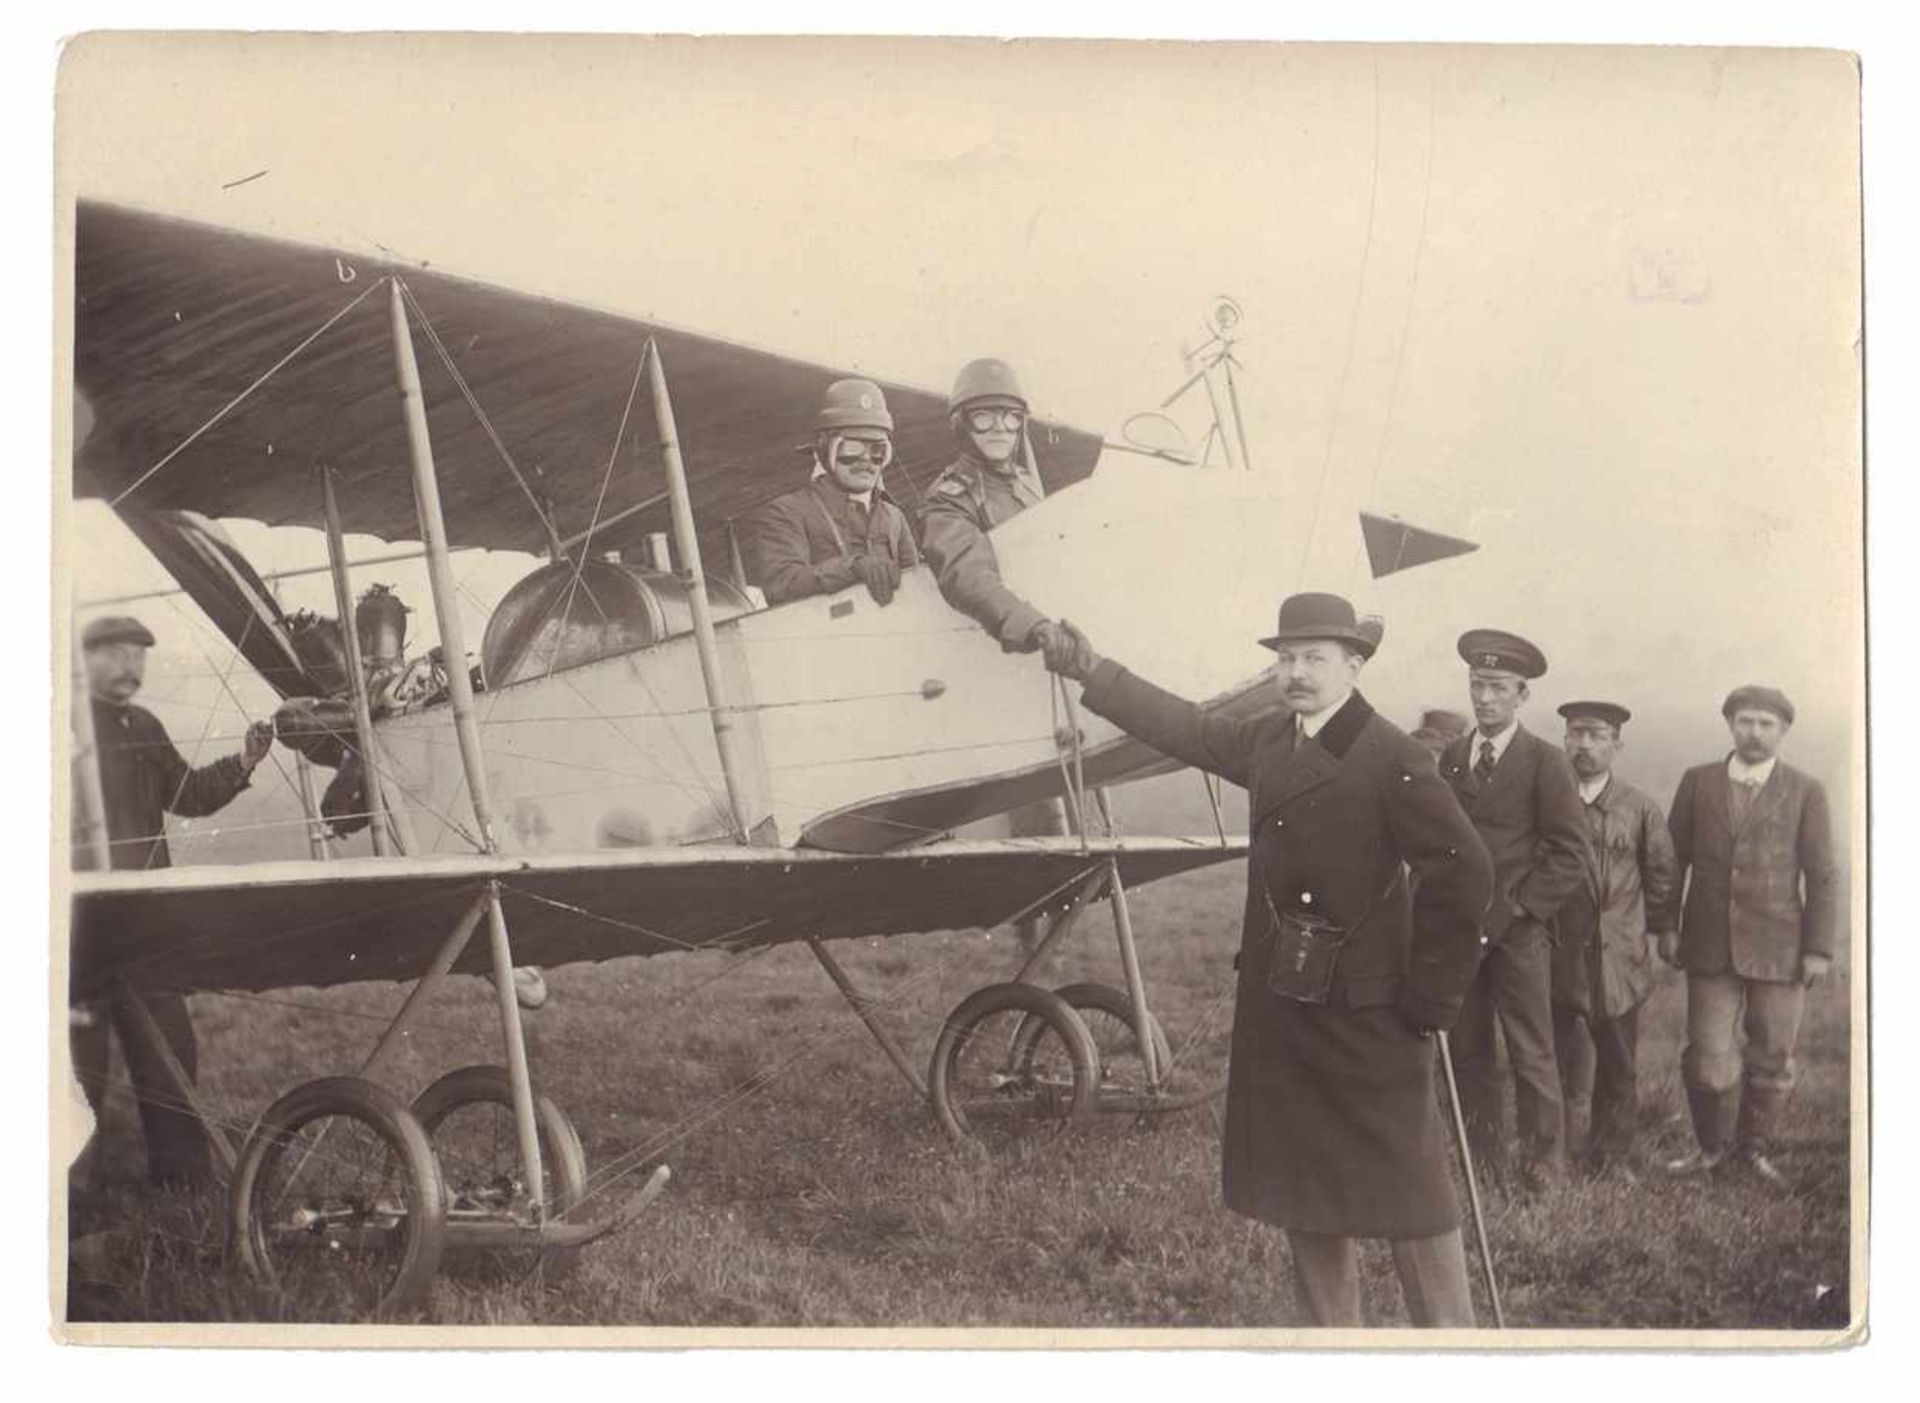 The first Russian aviators. Military aeroplanes on manoeuvres in Krasnoye Selo. 1913. Photograph.